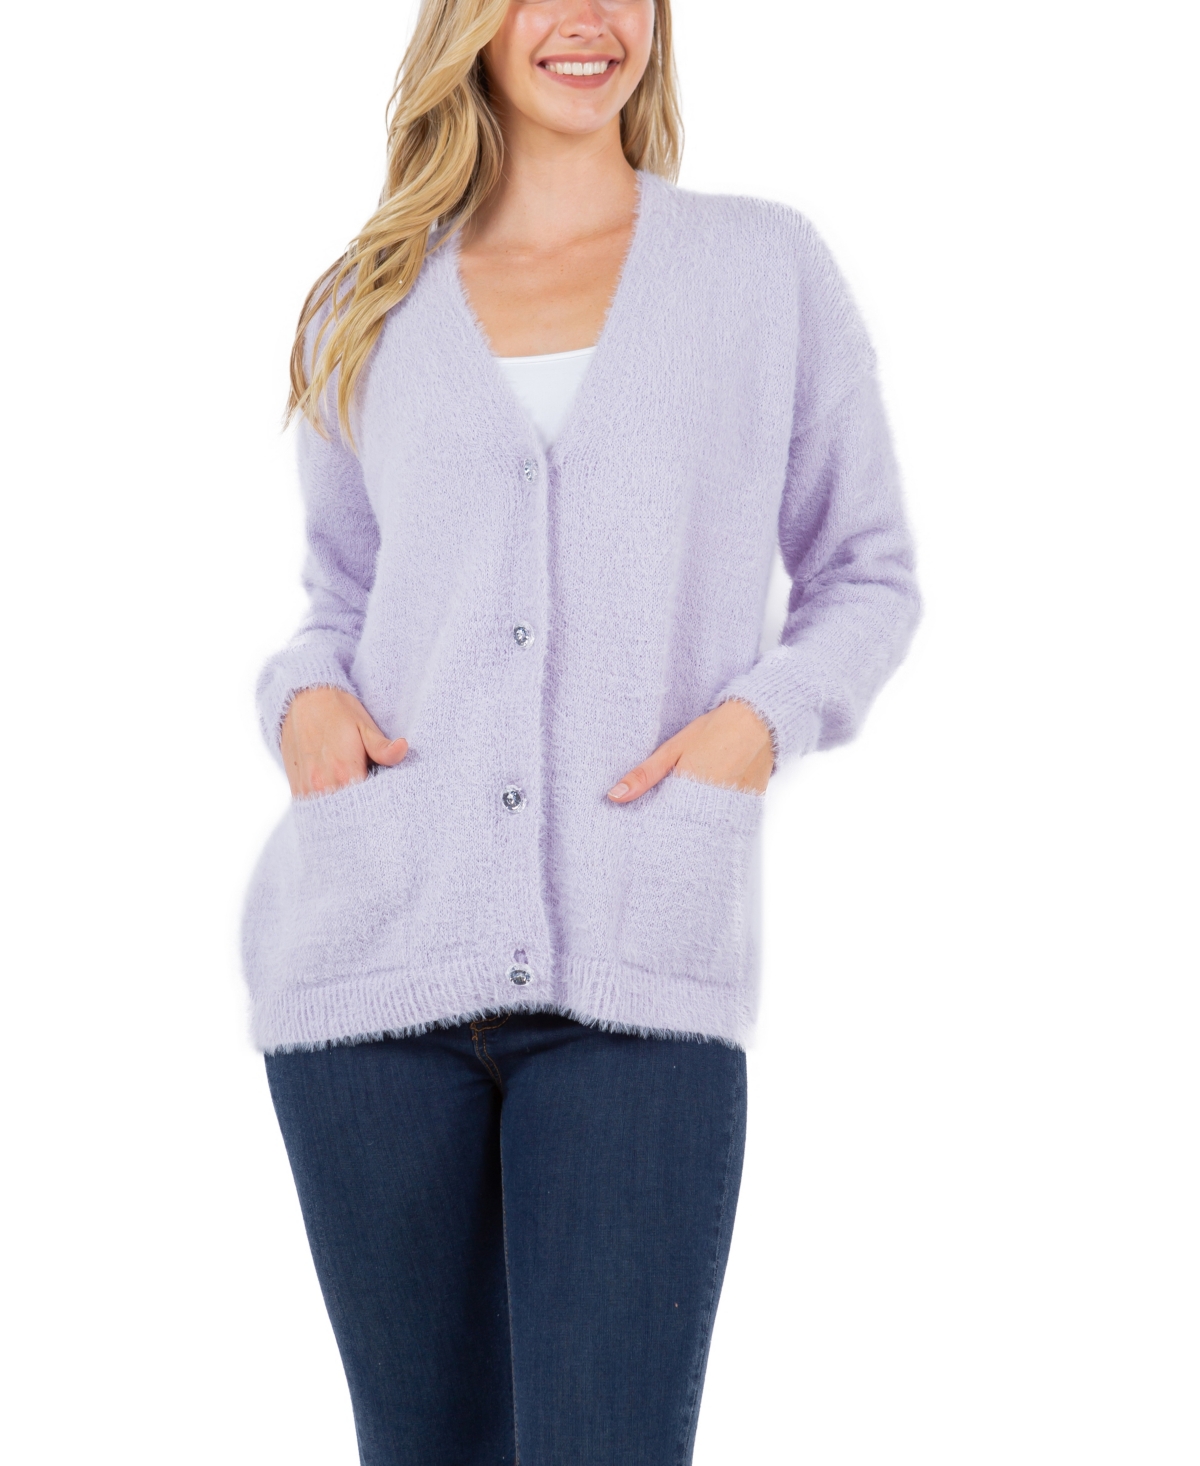 Women's Feather Cardigan Sweater with Jewel Button - Orchid Petal